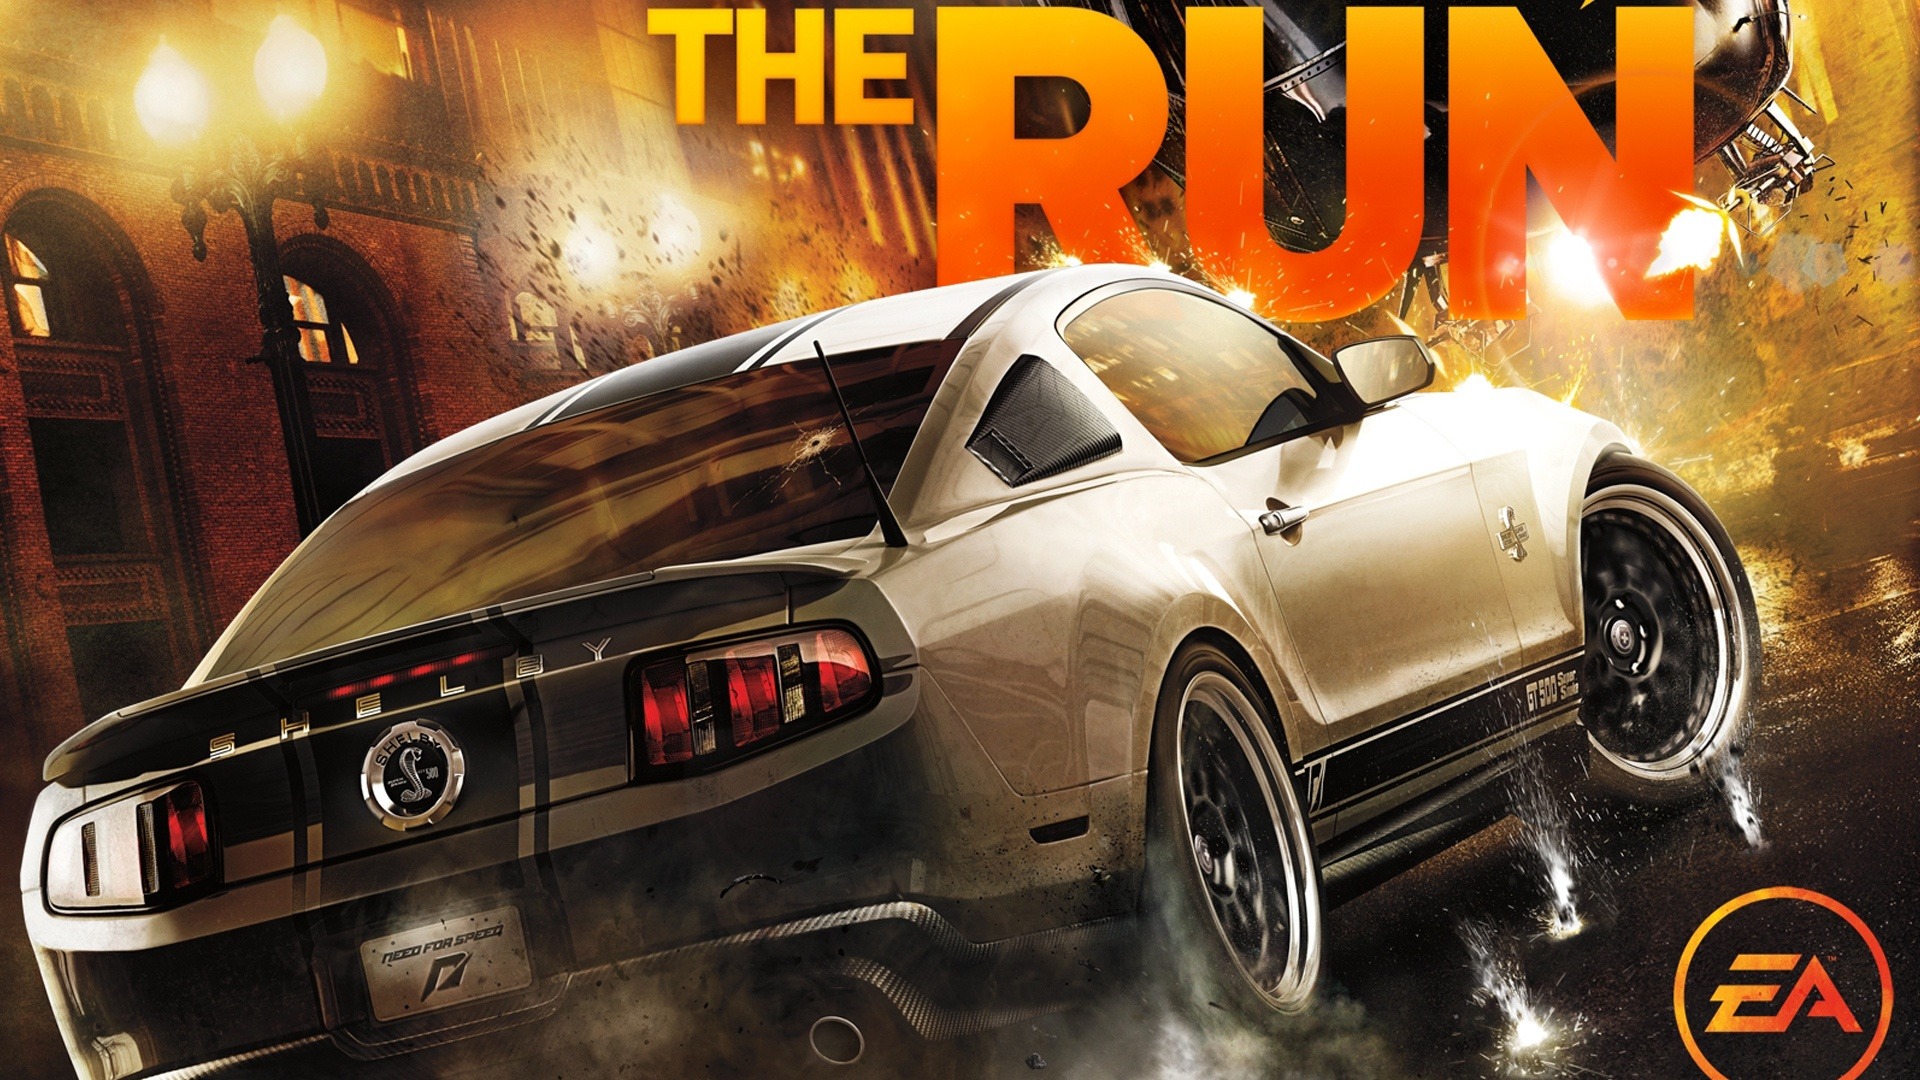 Need for Speed: The Run HD wallpapers #1 - 1920x1080